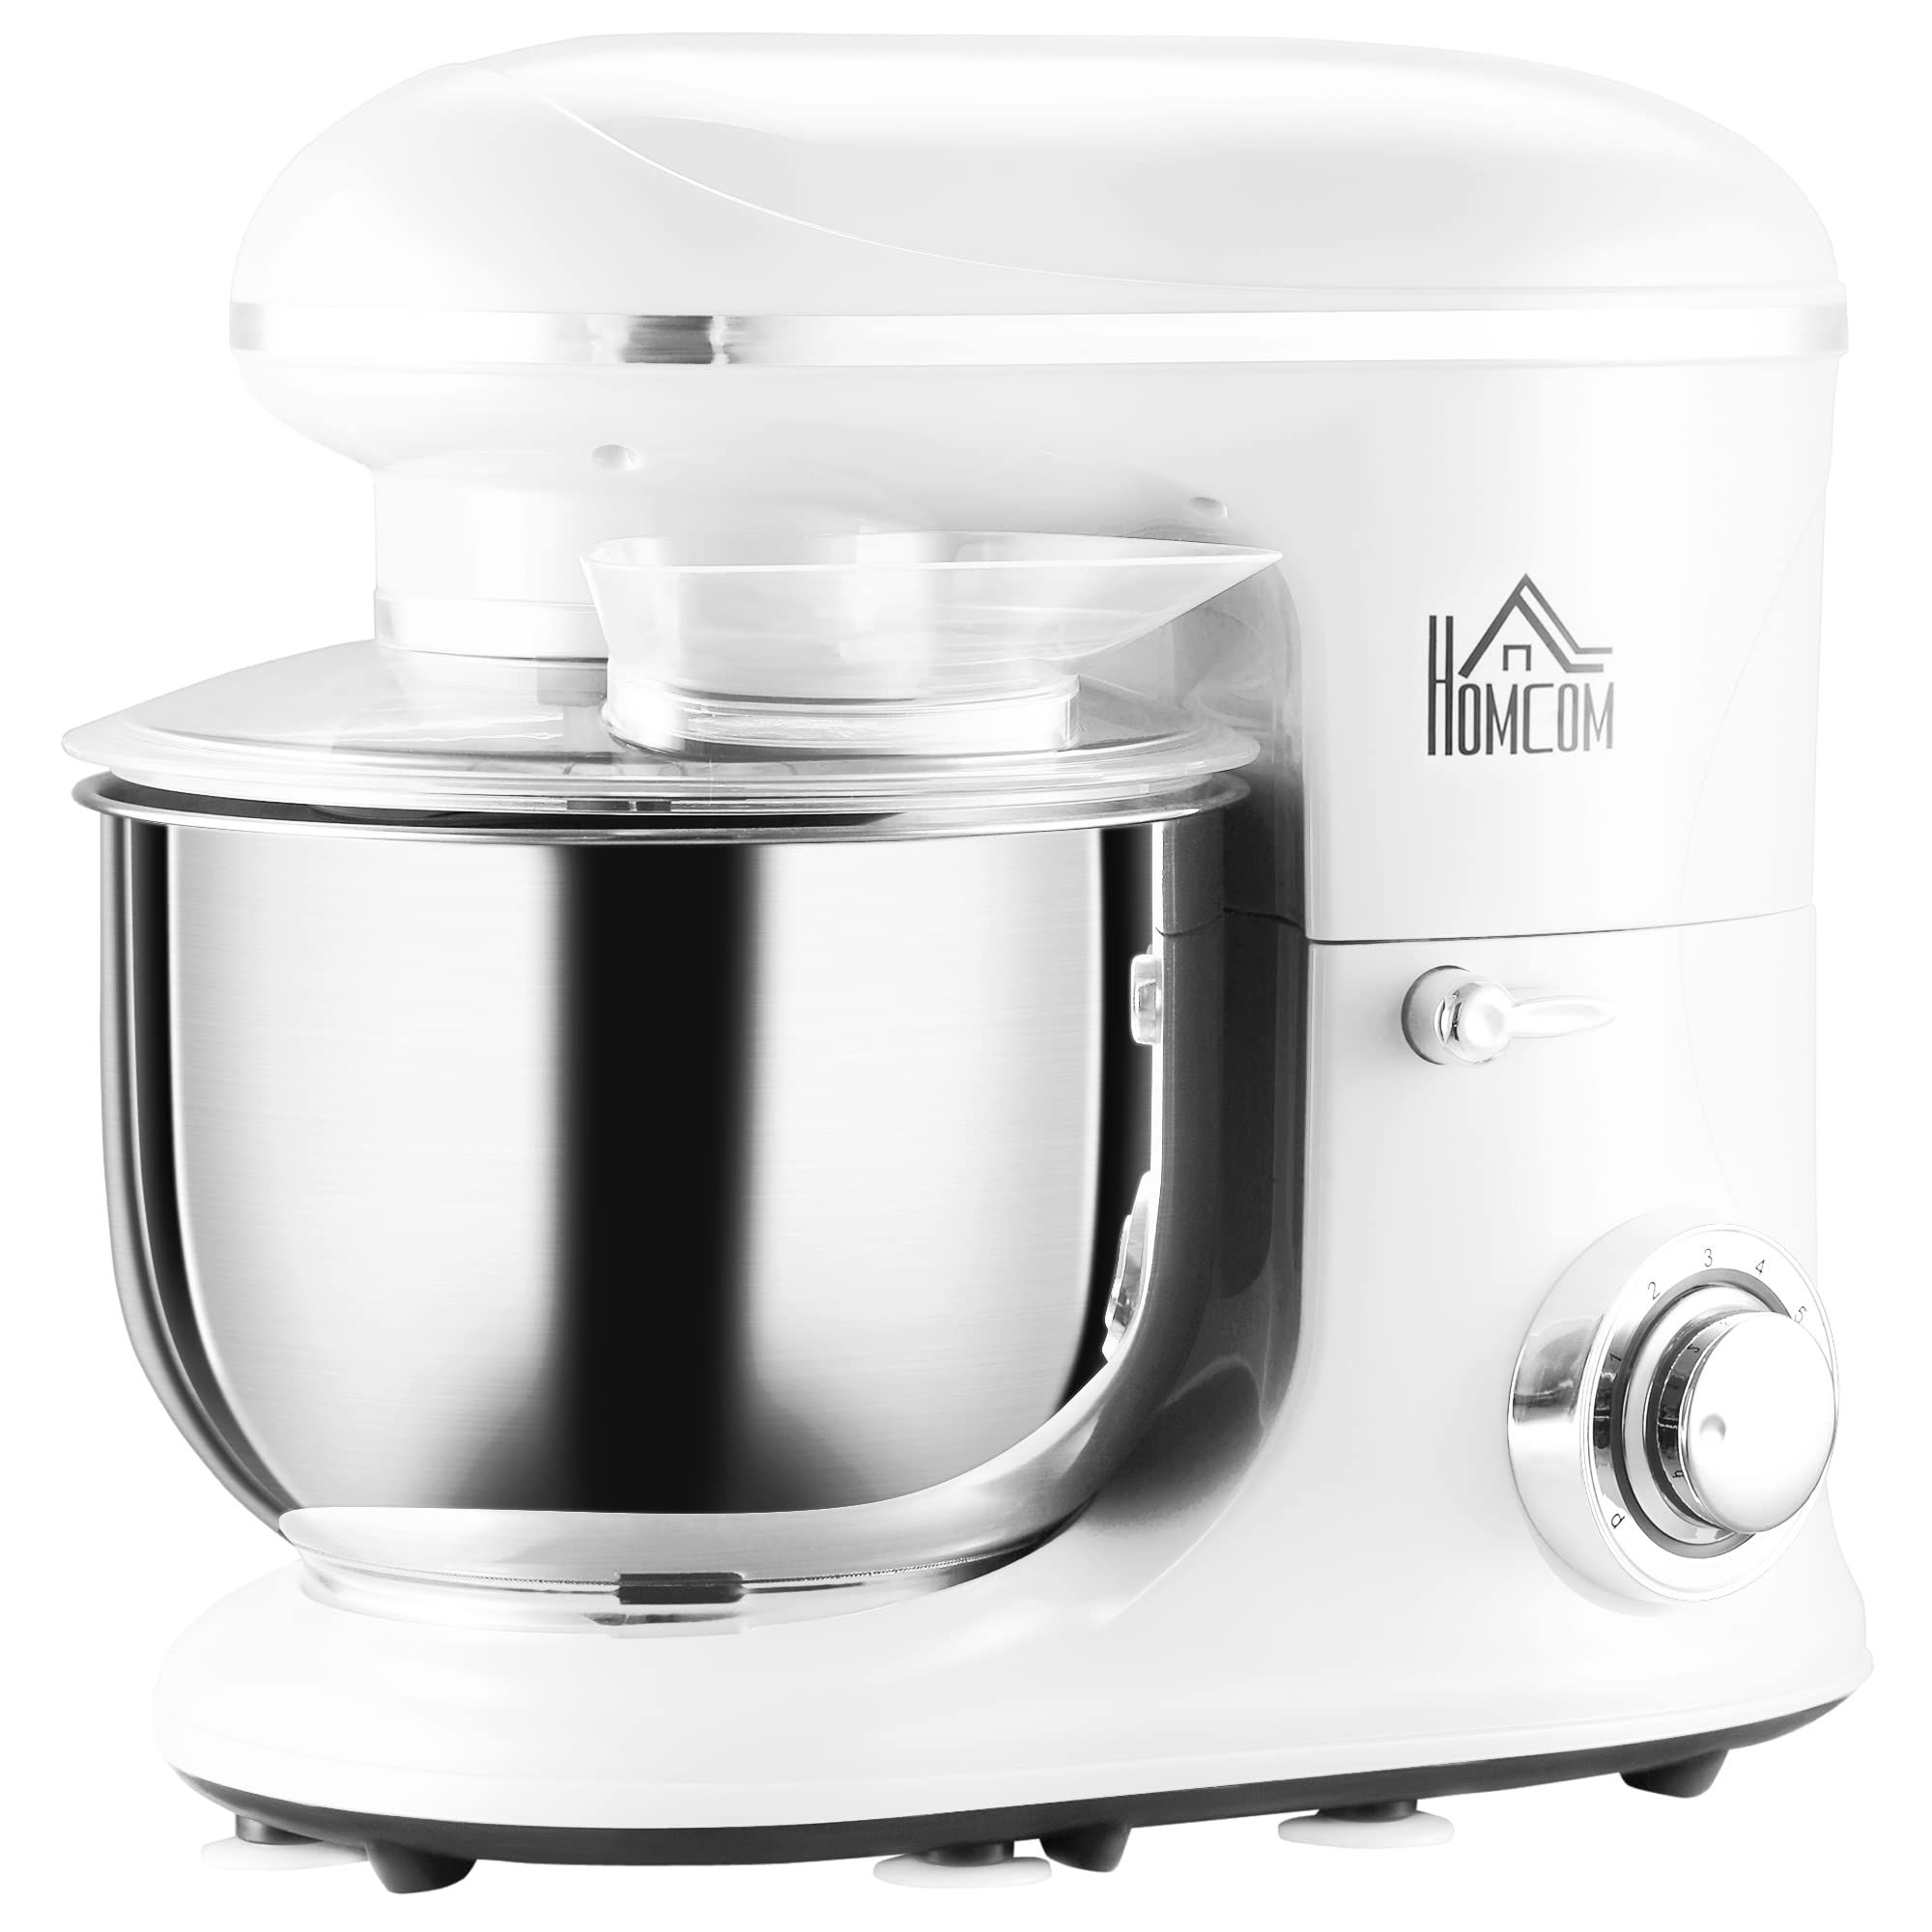 HOMCOM Stand Mixer with 6+1P Speed, 600W Tilt Head Kitchen Electric Mixer with 6 Qt Stainless Steel Mixing Bowl, Beater, Dough Hook and Splash Guard for Baking Bread, Cakes, and Cookies, White | Amazon (US)